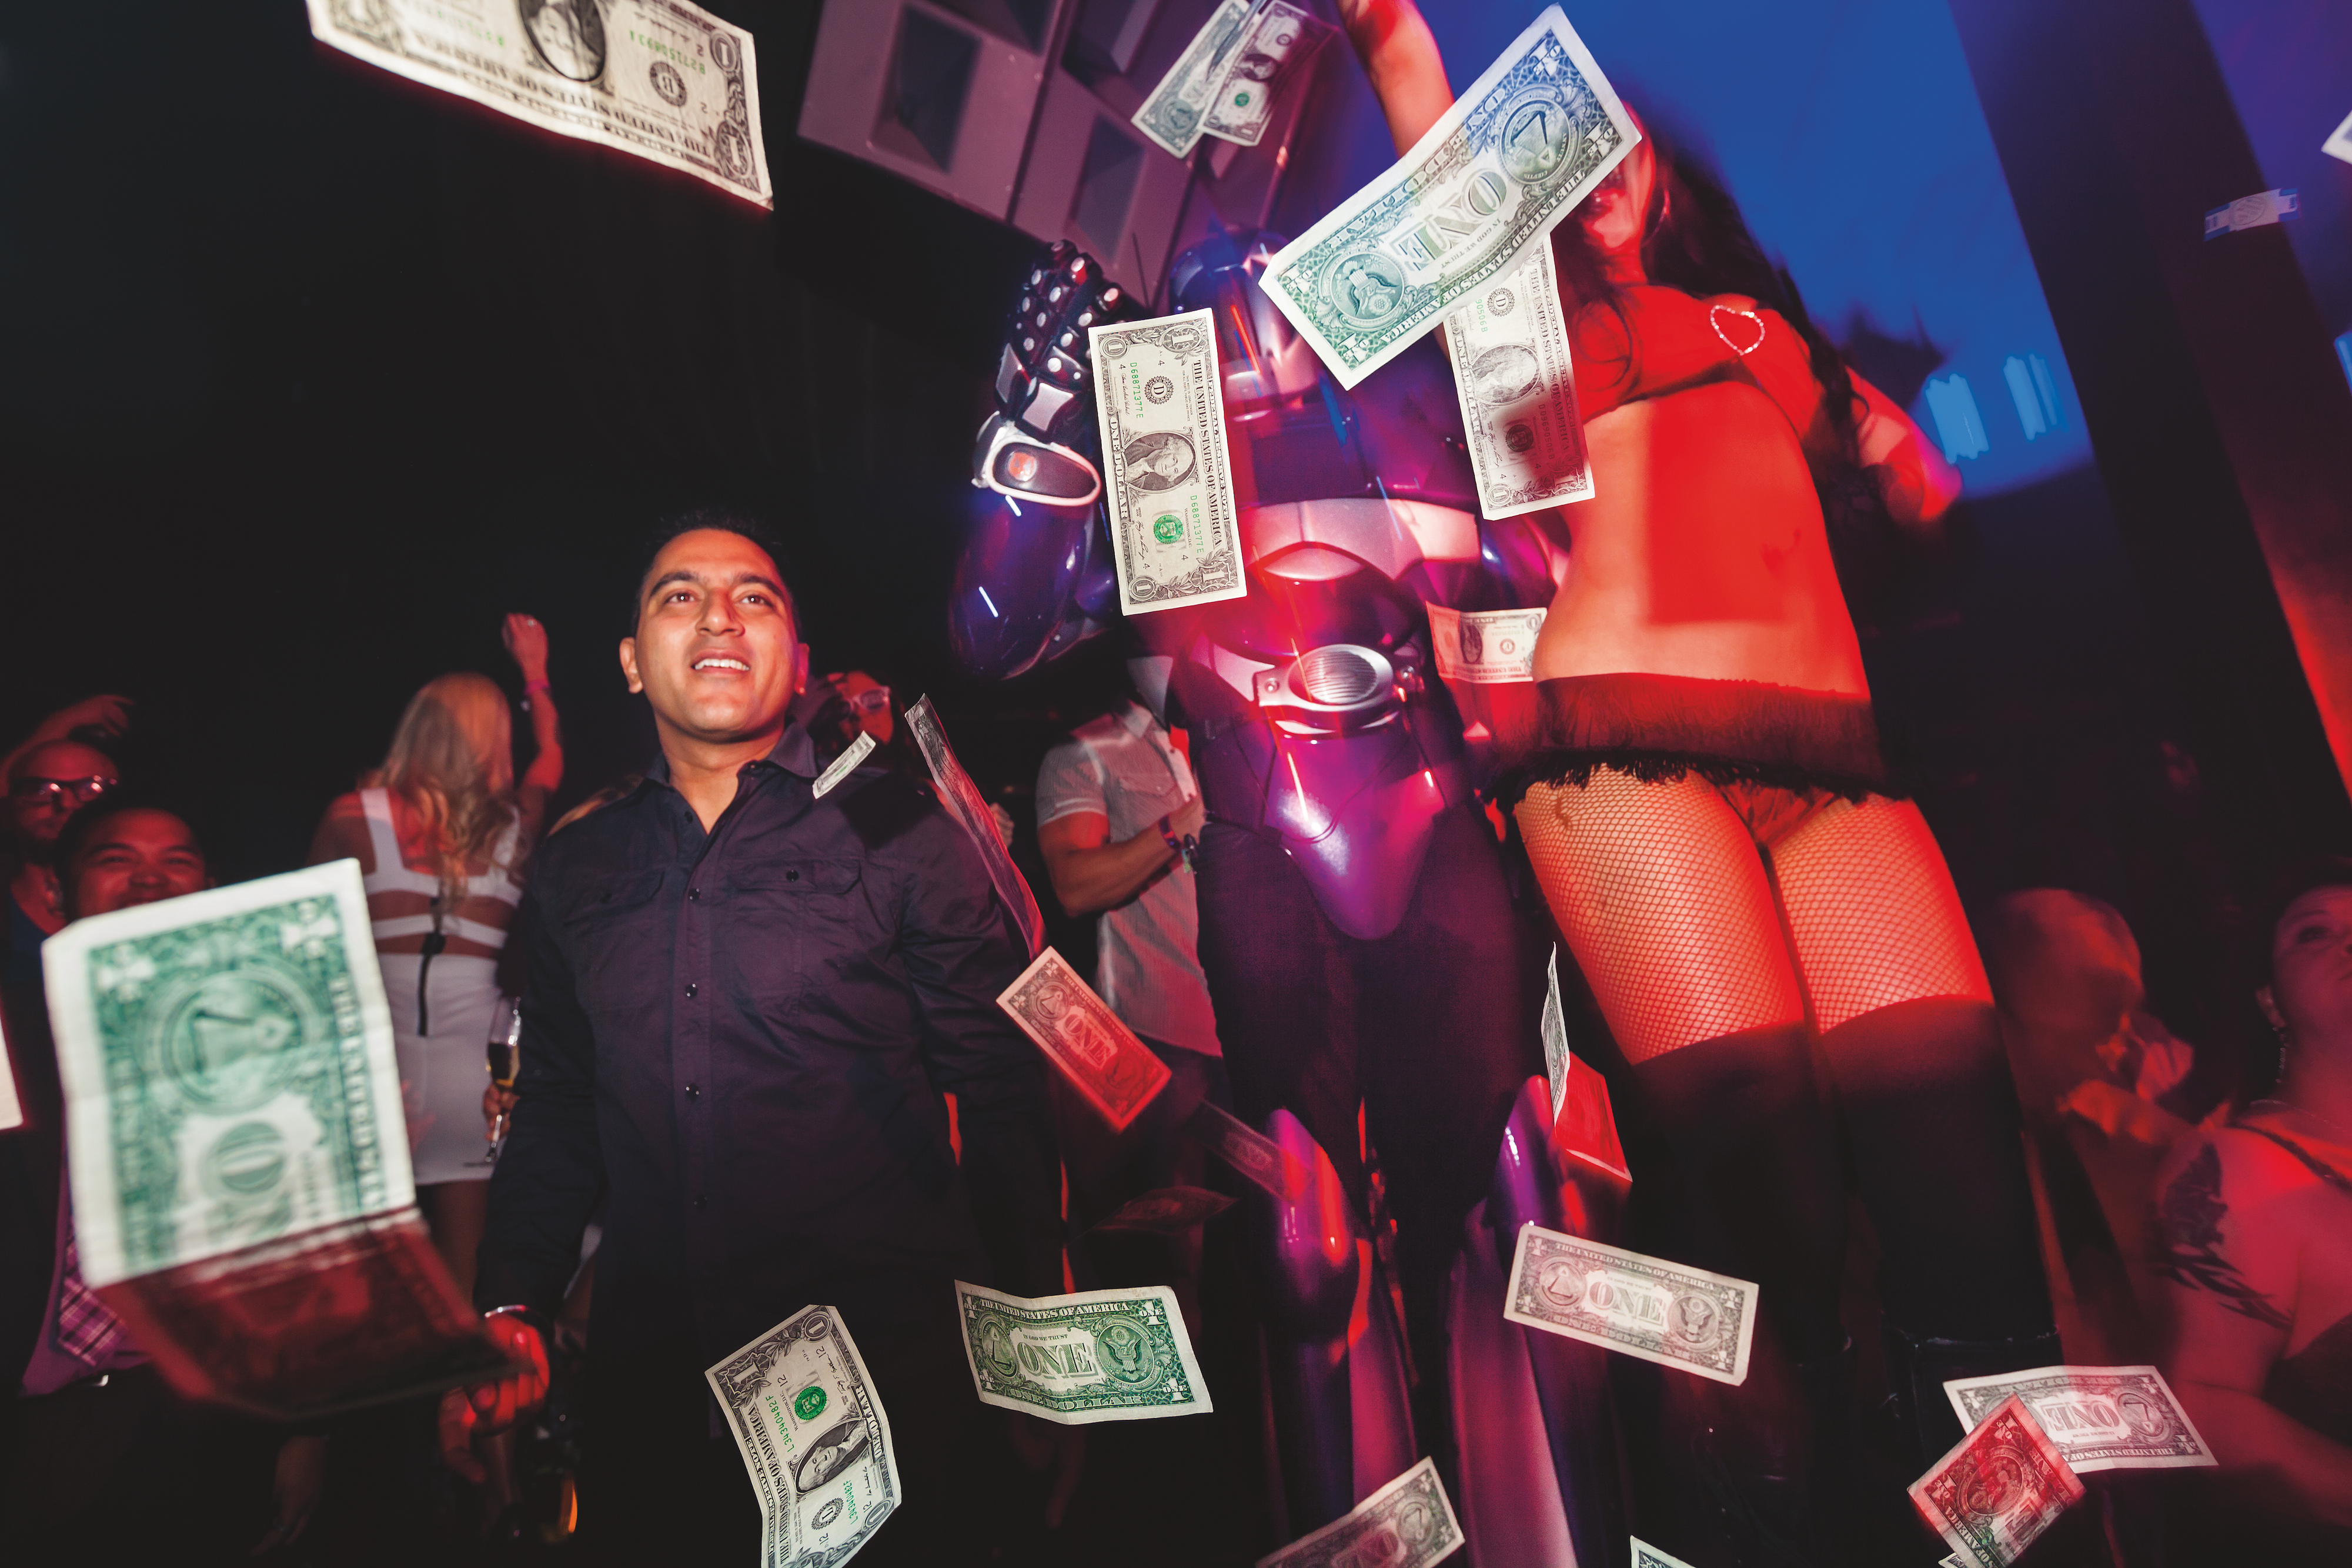 A VIP guest “makes it rain” with hundreds of dollar bills on a sold-out Saturday night at 